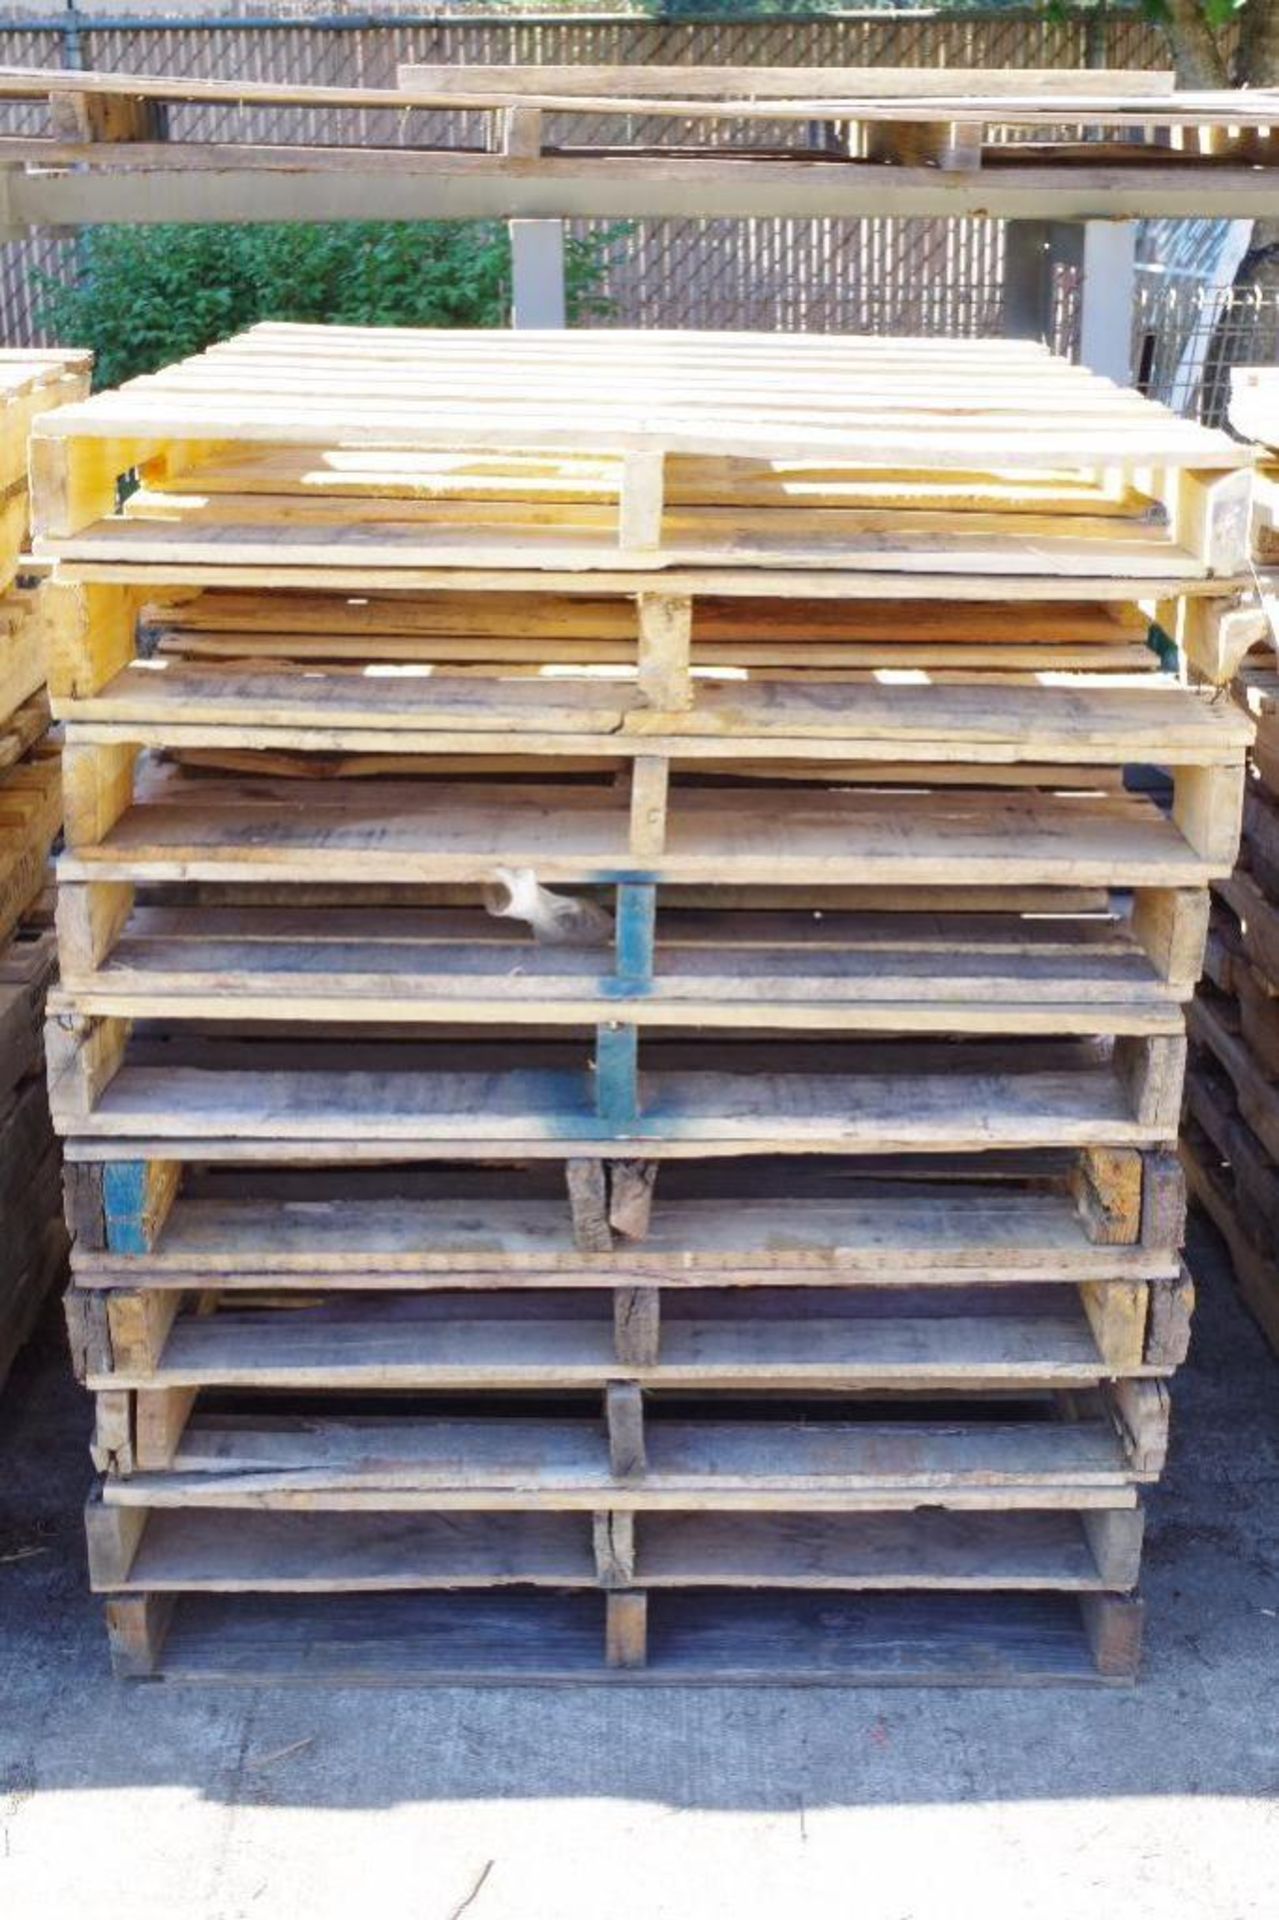 (10) 40"W x 48"L Wood Pallets, Mixed Quality, Some Rough - Image 2 of 2